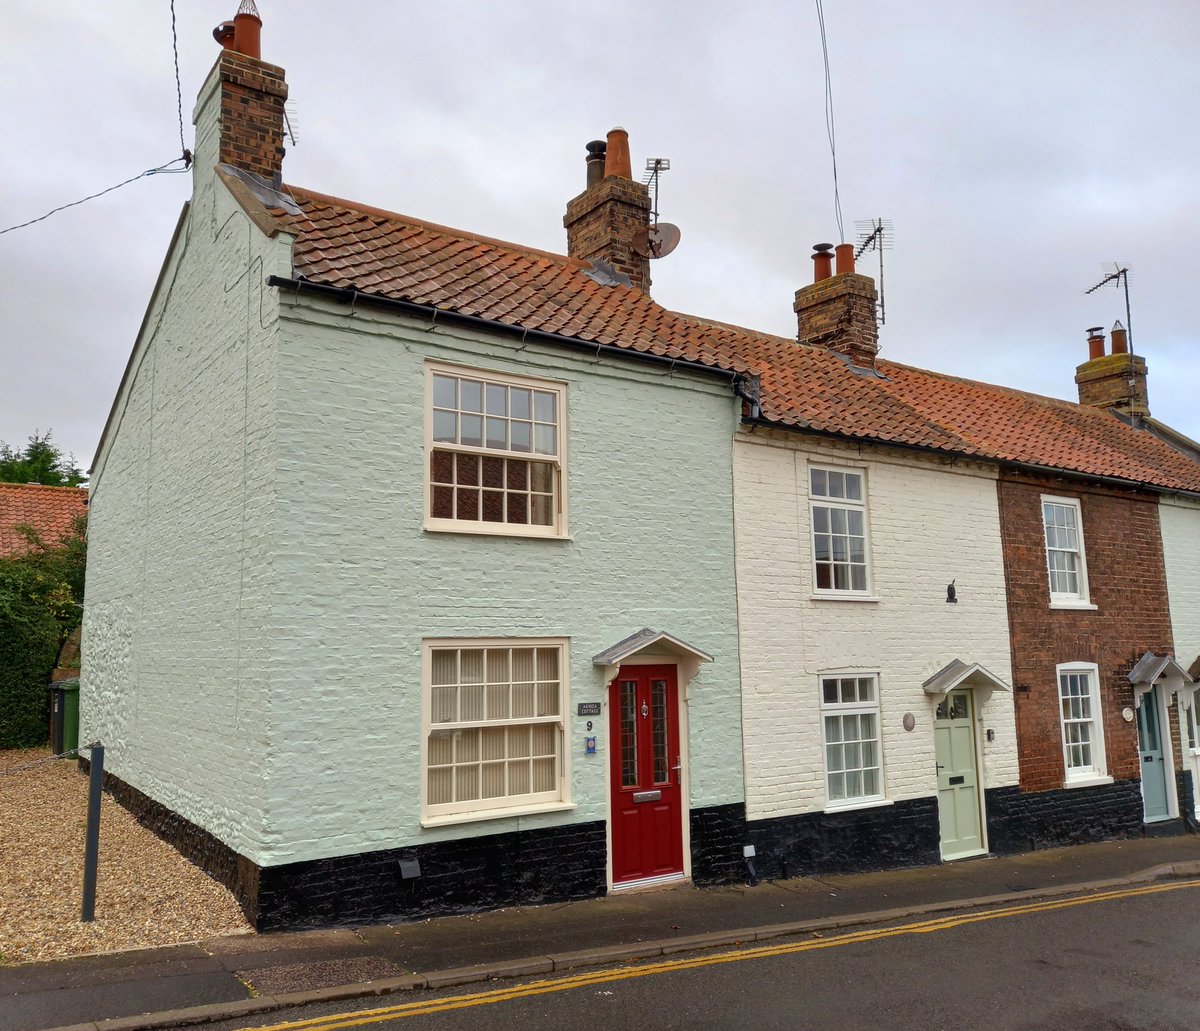 Colourful cottages in Wells next the Sea, Norfolk. Clay pan tiled roofs and sash windows. What is not to like?